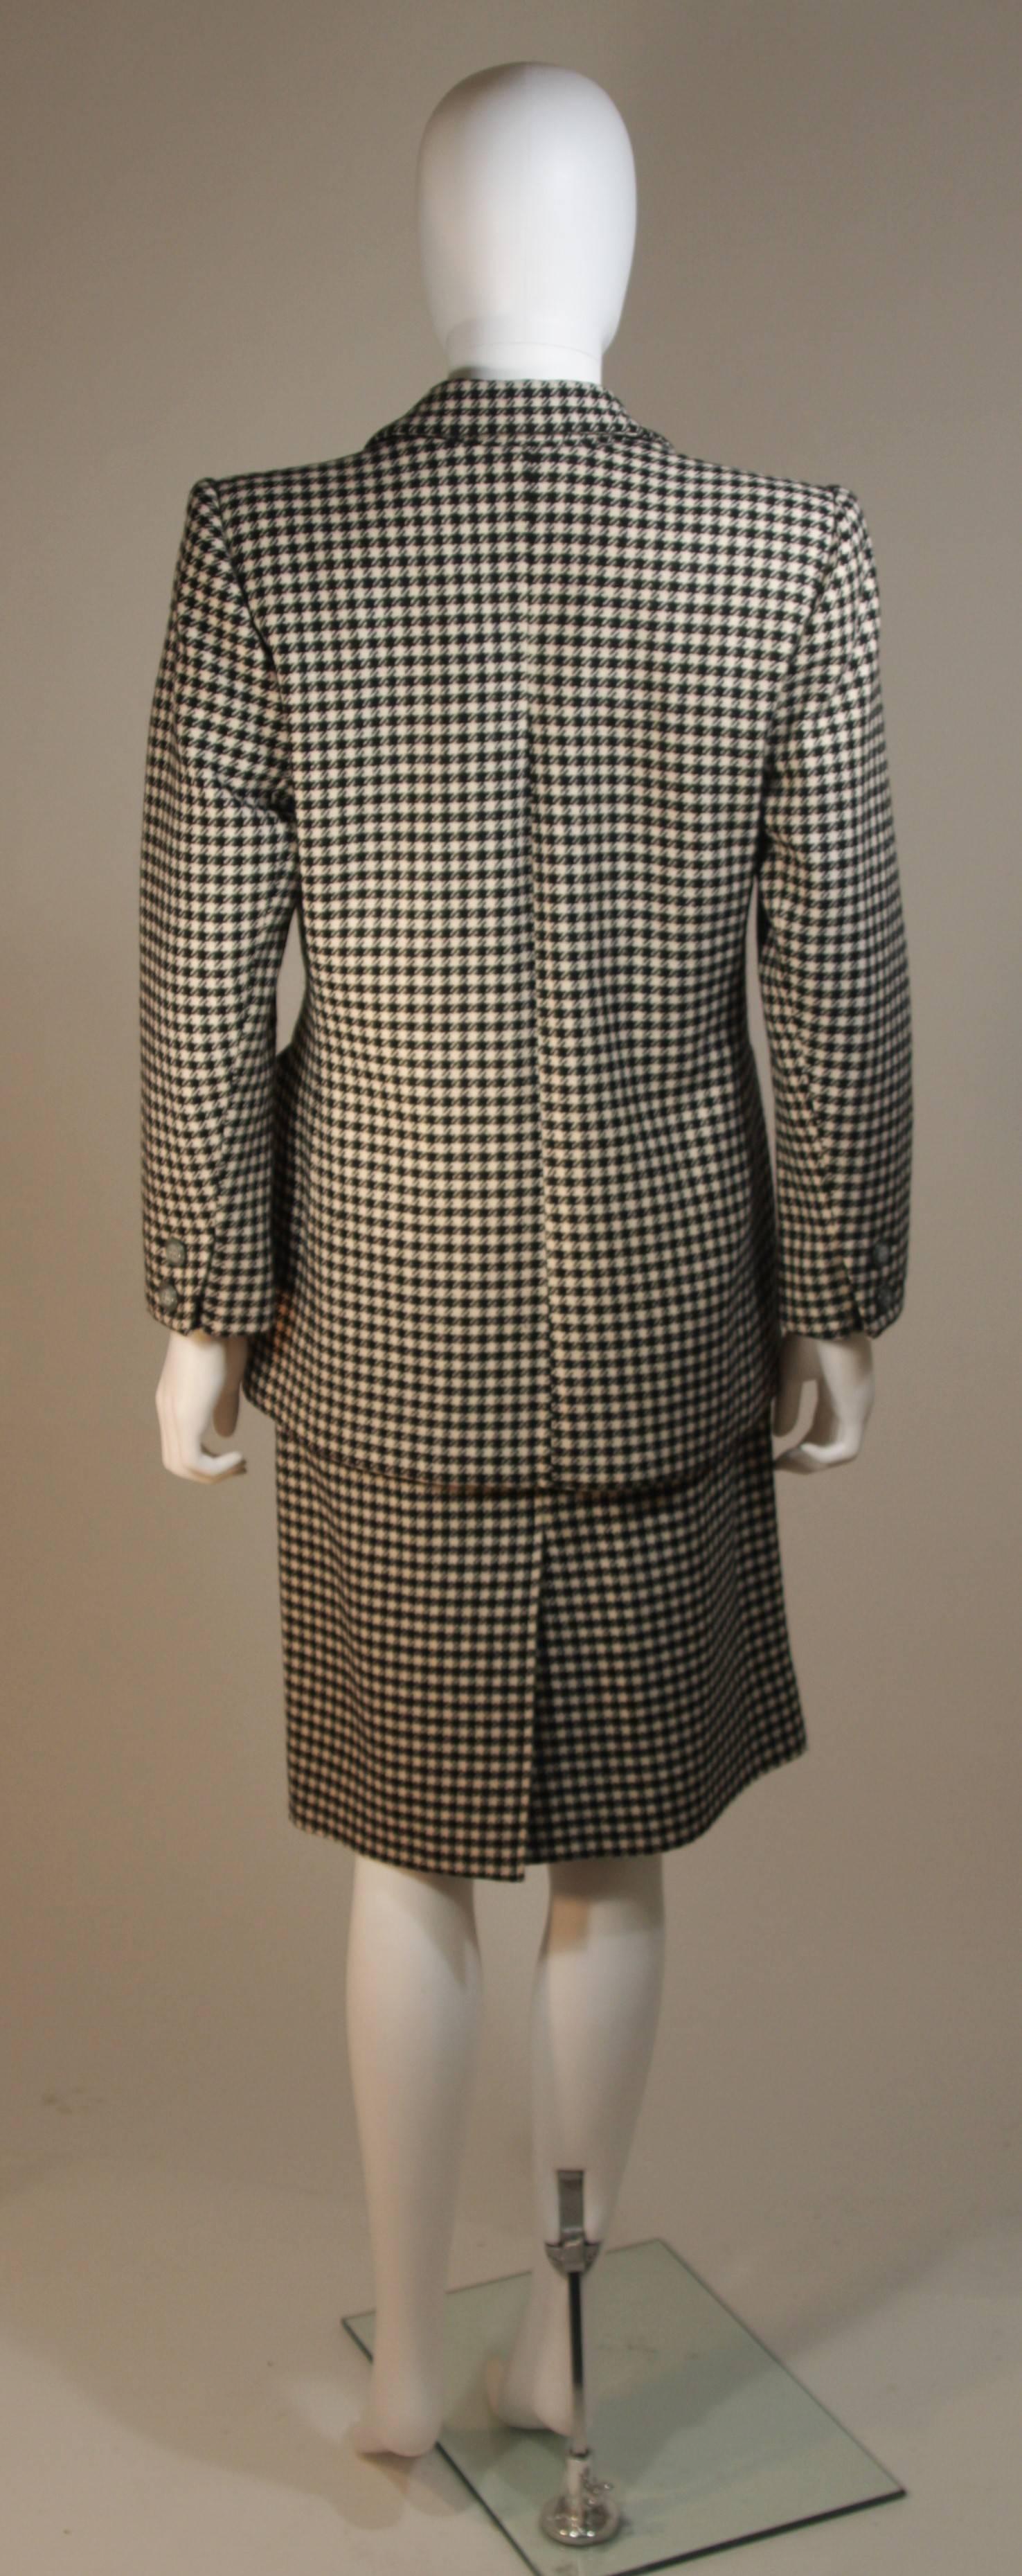 YVES SAINT LAURENT Black and White Wool Houndstooth Skirt Suit Size 36 40 For Sale 2